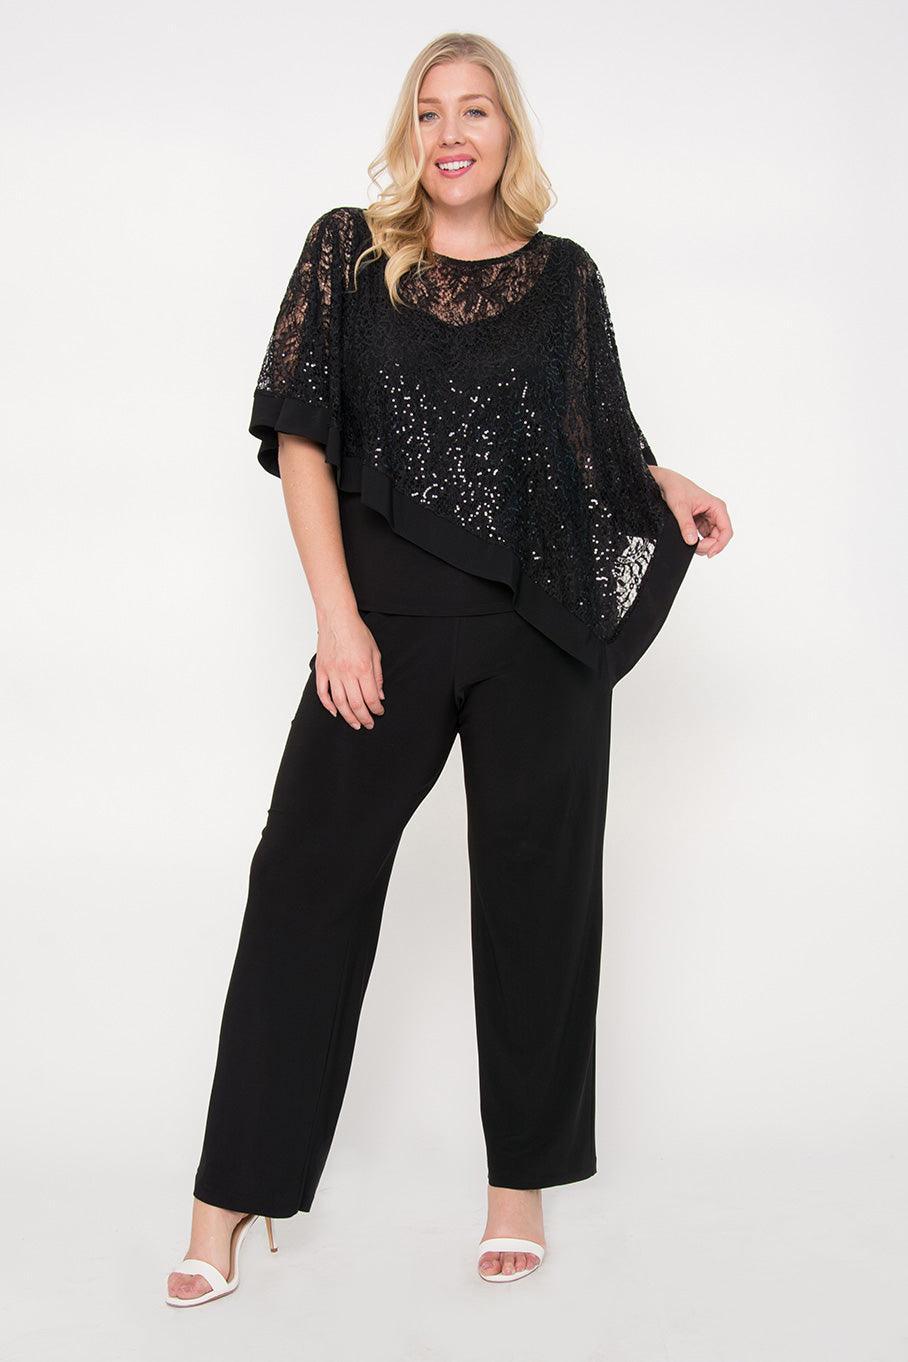 Mocha R&M Richards 8998W Plus Size Formal Top Only for $29.99 – The ...